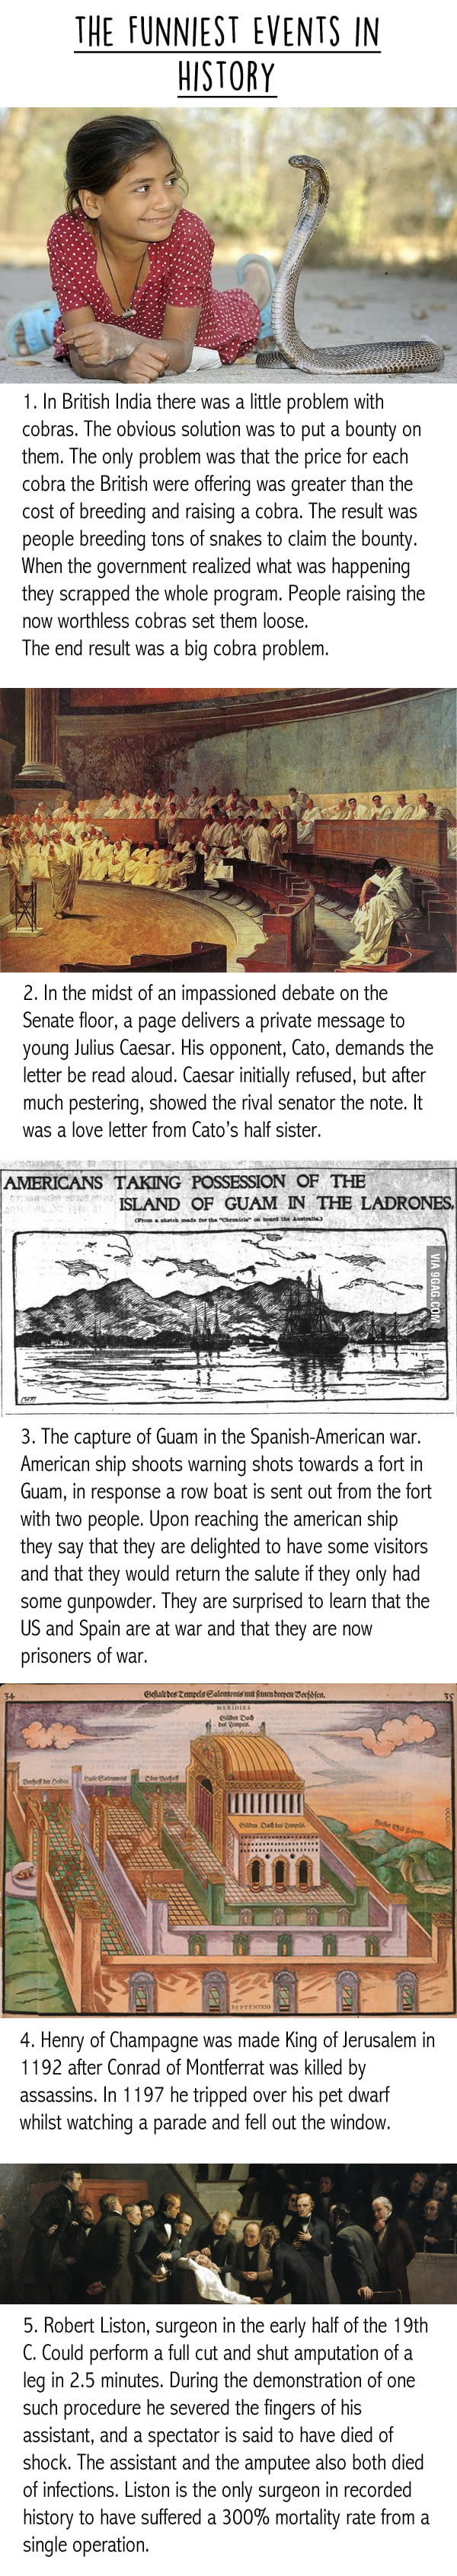 The funniest historical events 9GAG